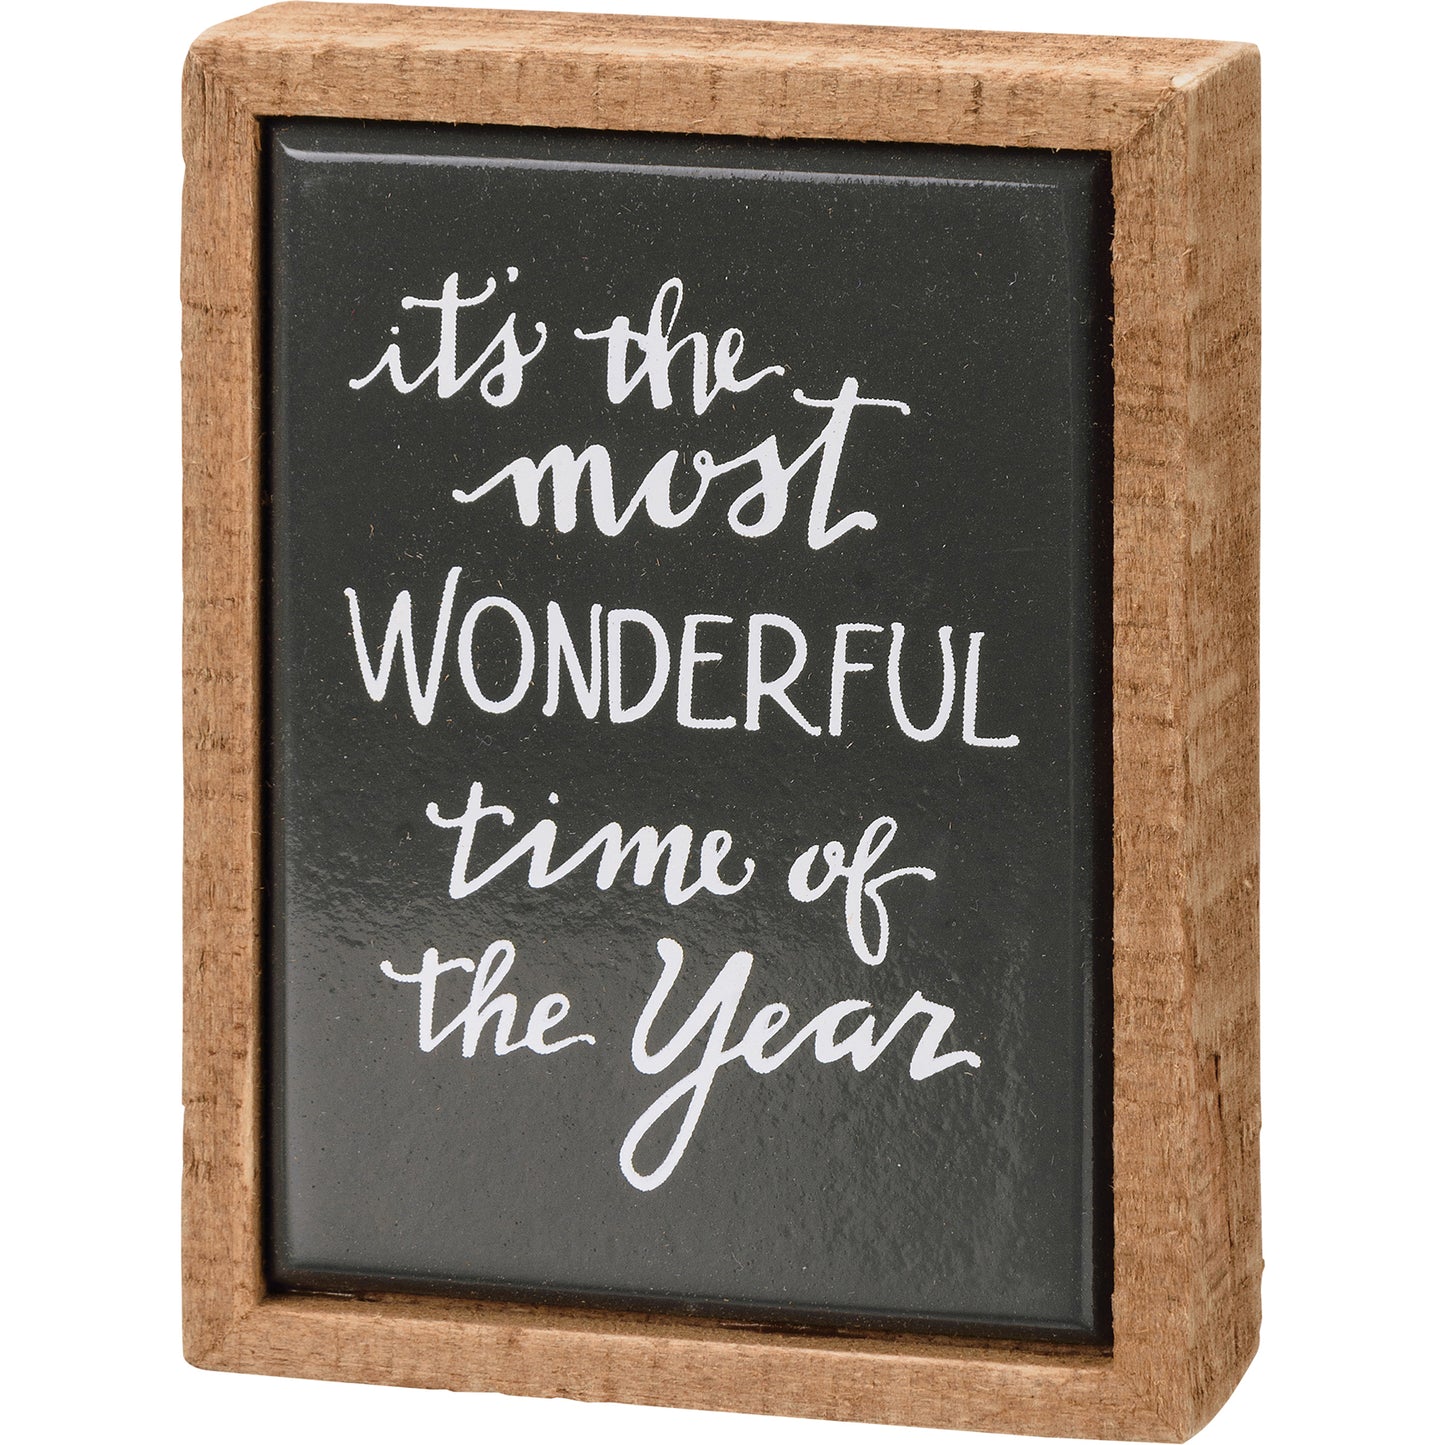 Most Wonderful Time of the Year - mini word block